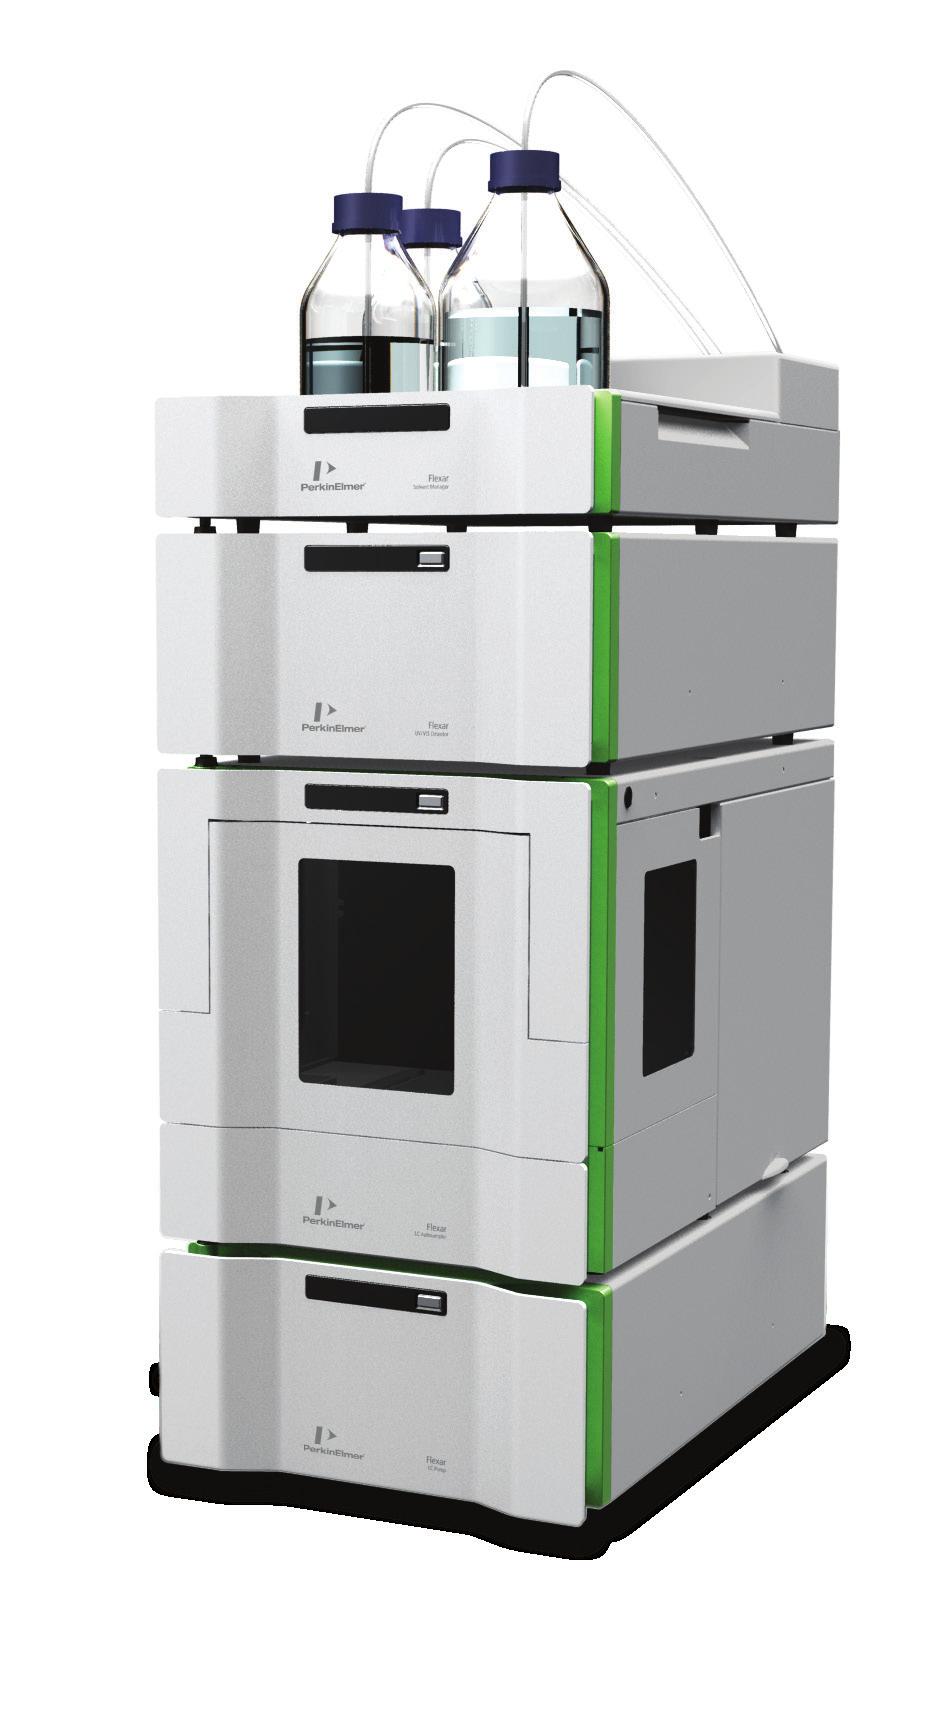 CHOOSE EXACTLY THE SYSTEM YOU NEED Whether you need conventional liquid chromatography (LC) or ultrahigh performance, with our versatile Flexar solutions you can count on the right technology for the